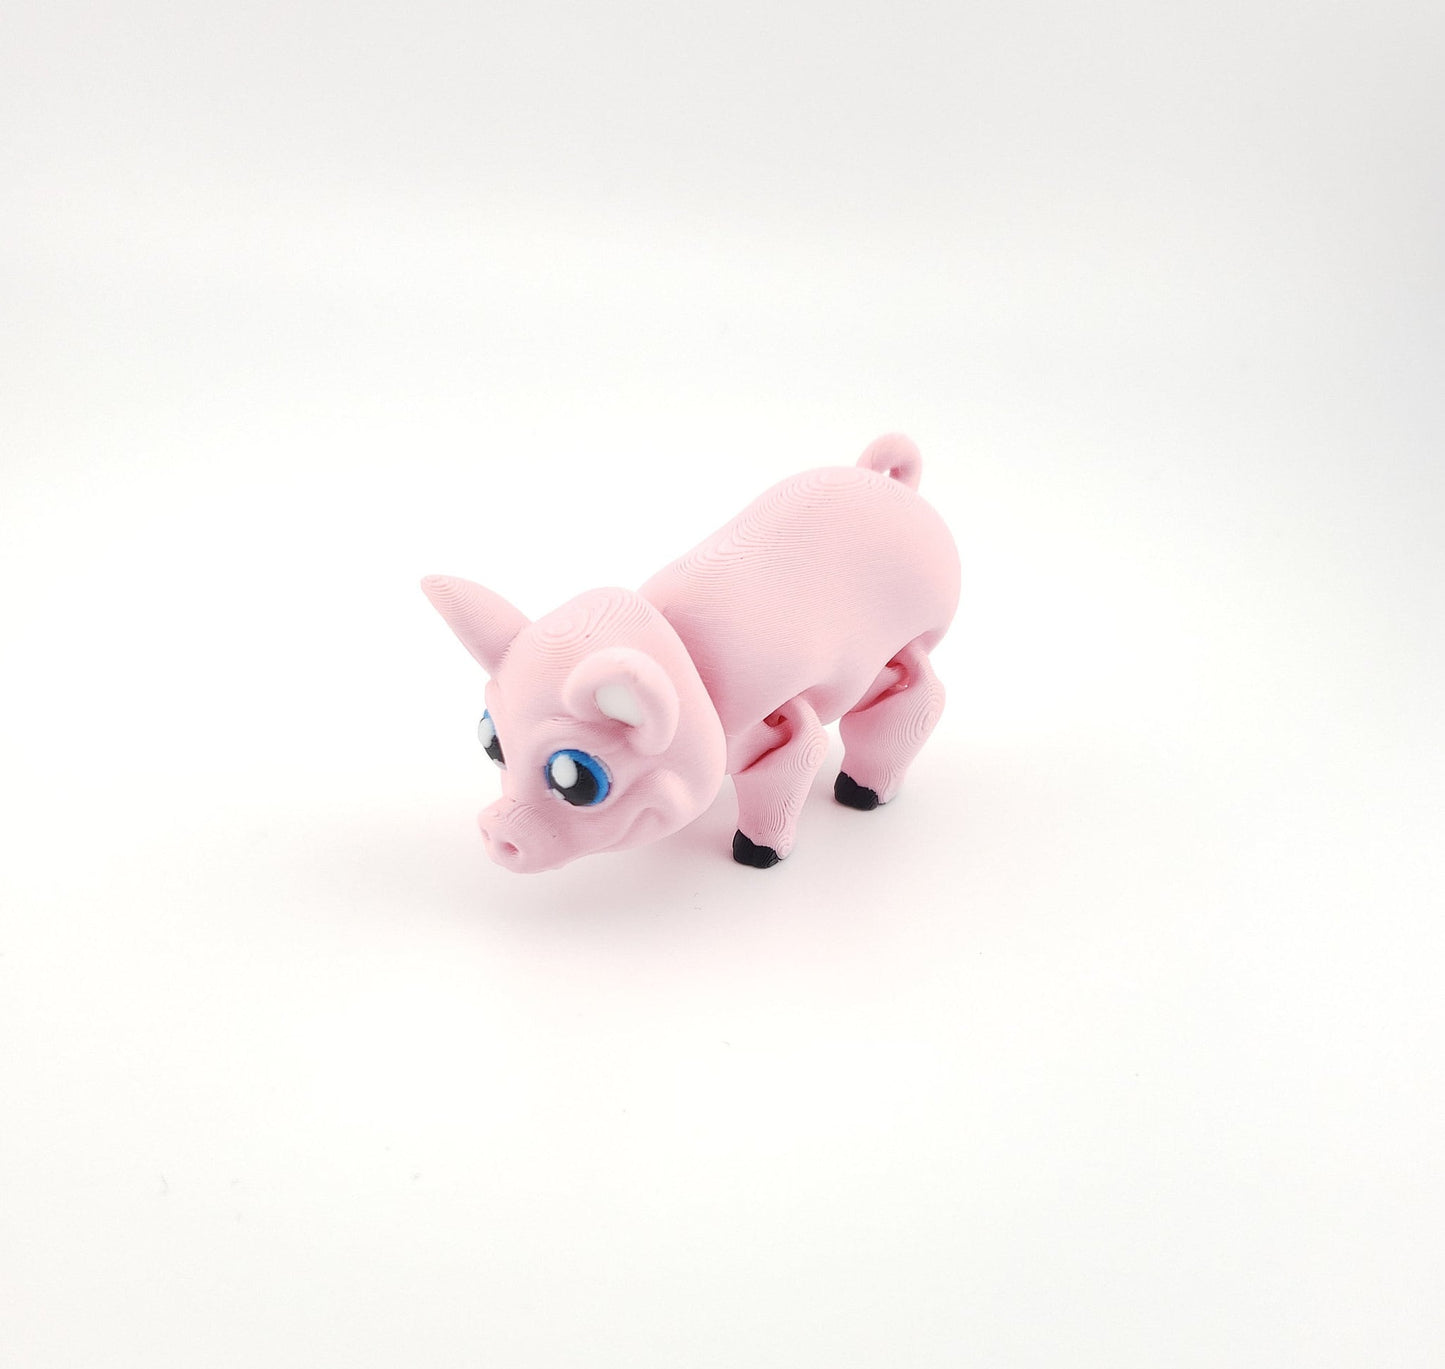 Flexi Pig - 3D Printed Fidget Fantasy Creature - Authorized Seller - Articulated Toy Figure